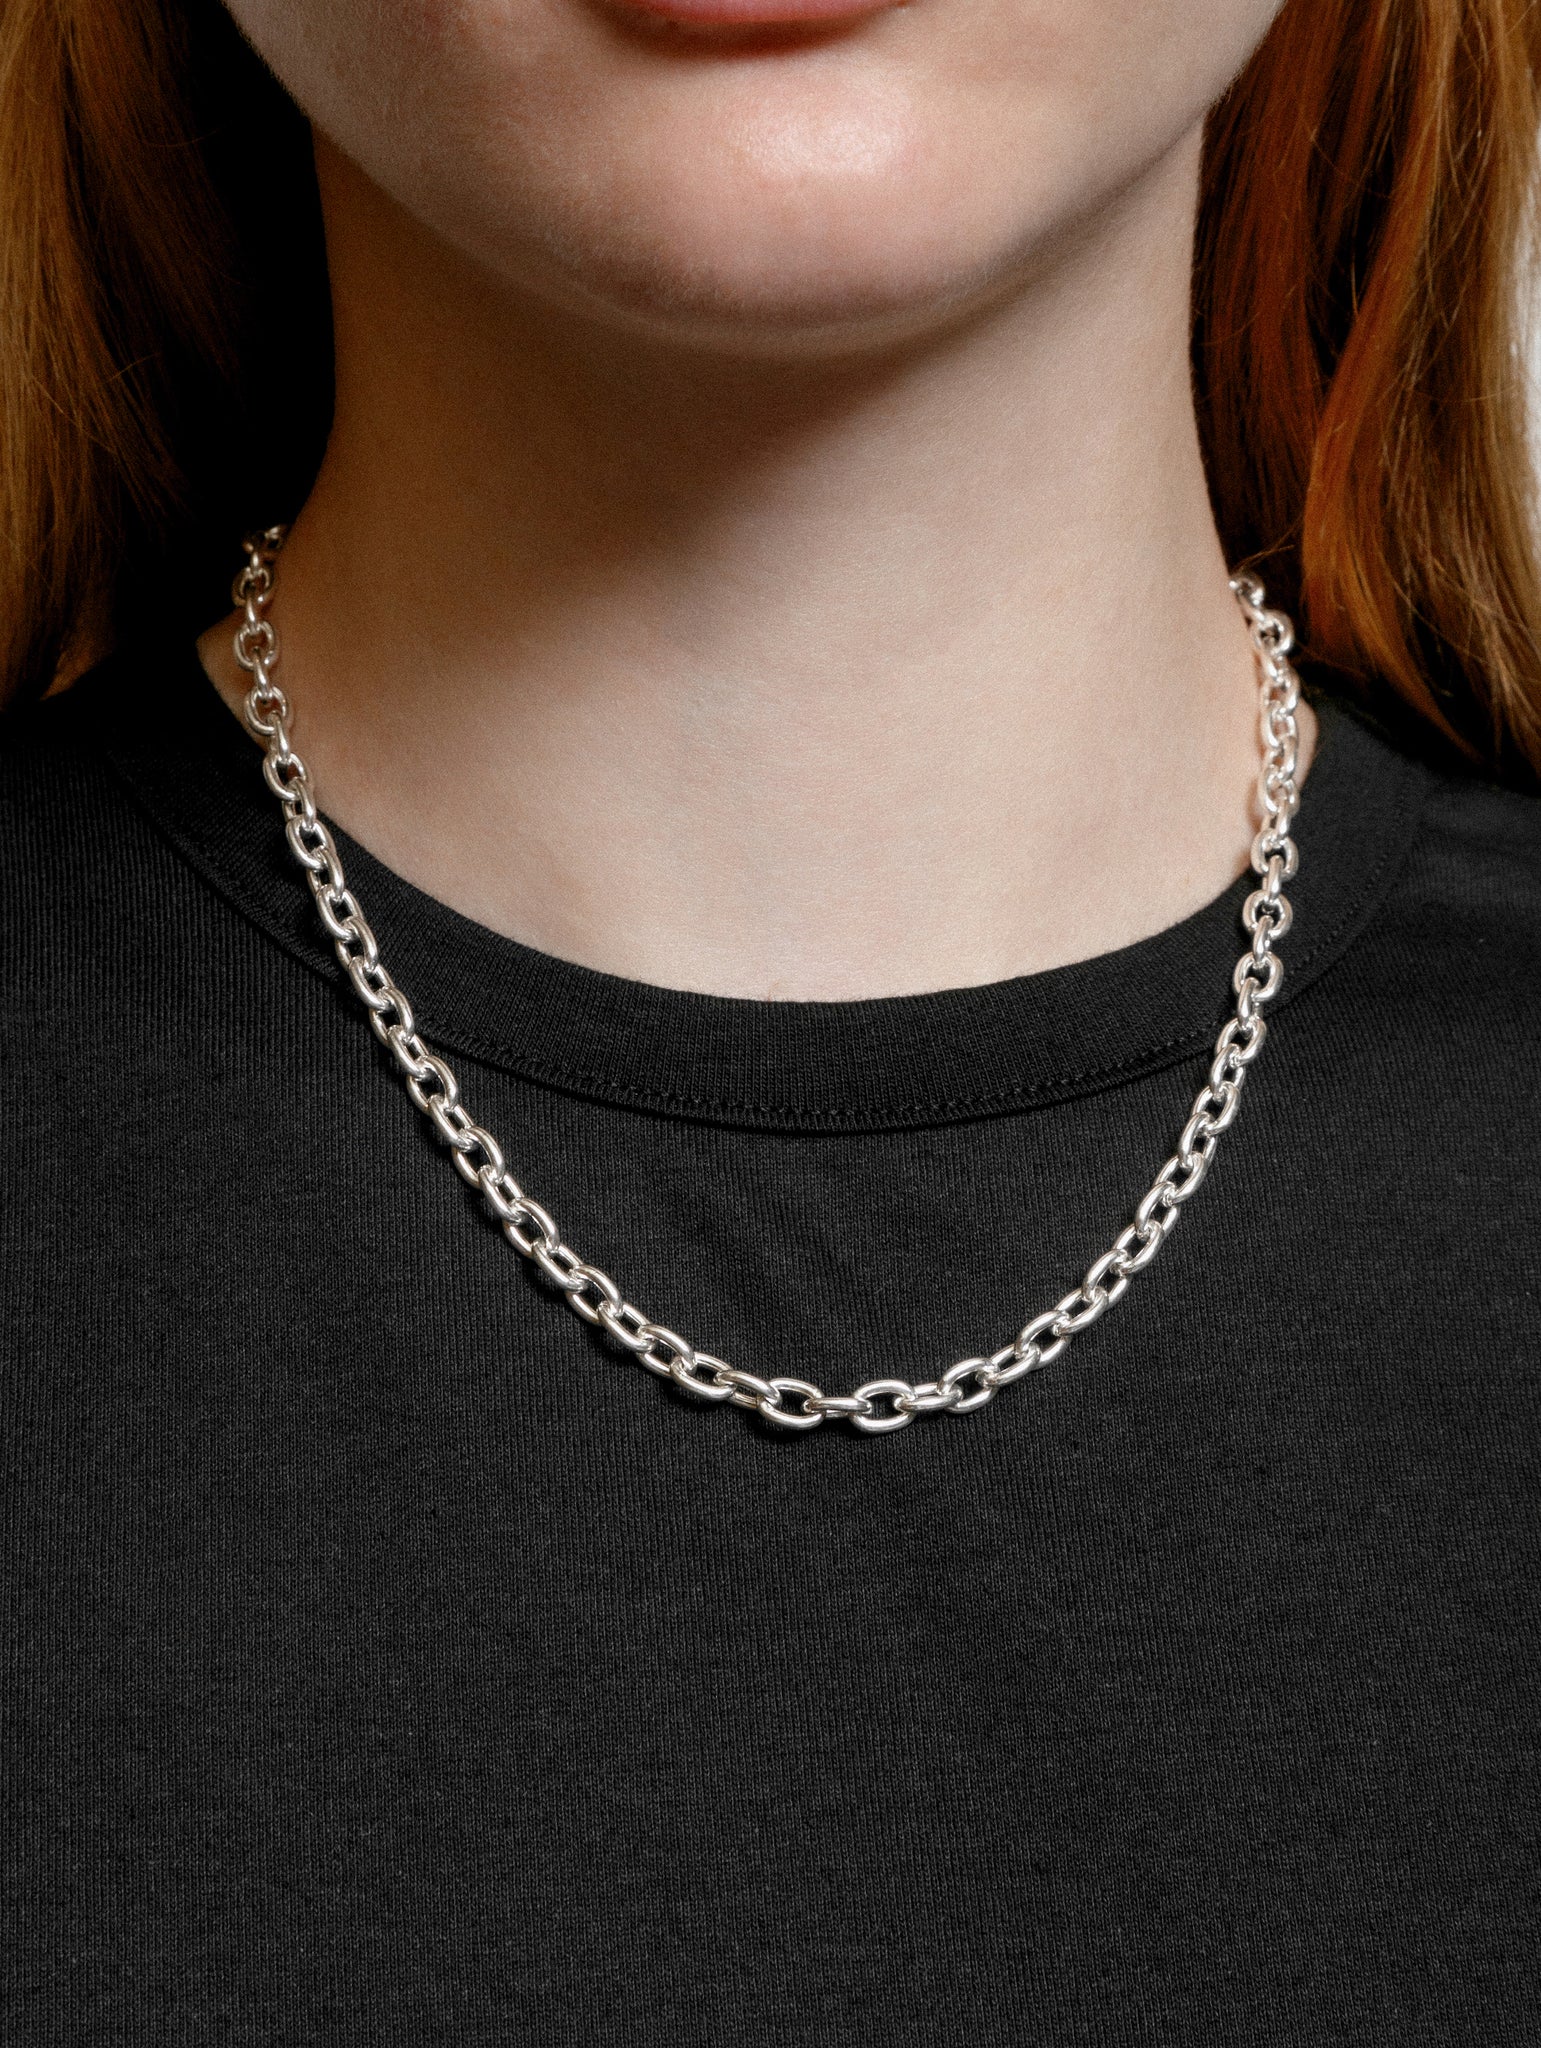 Wolf Circus Minimalist Unisex Cable Chain Link Layering Necklace 925 Sterling Silver Jewelry